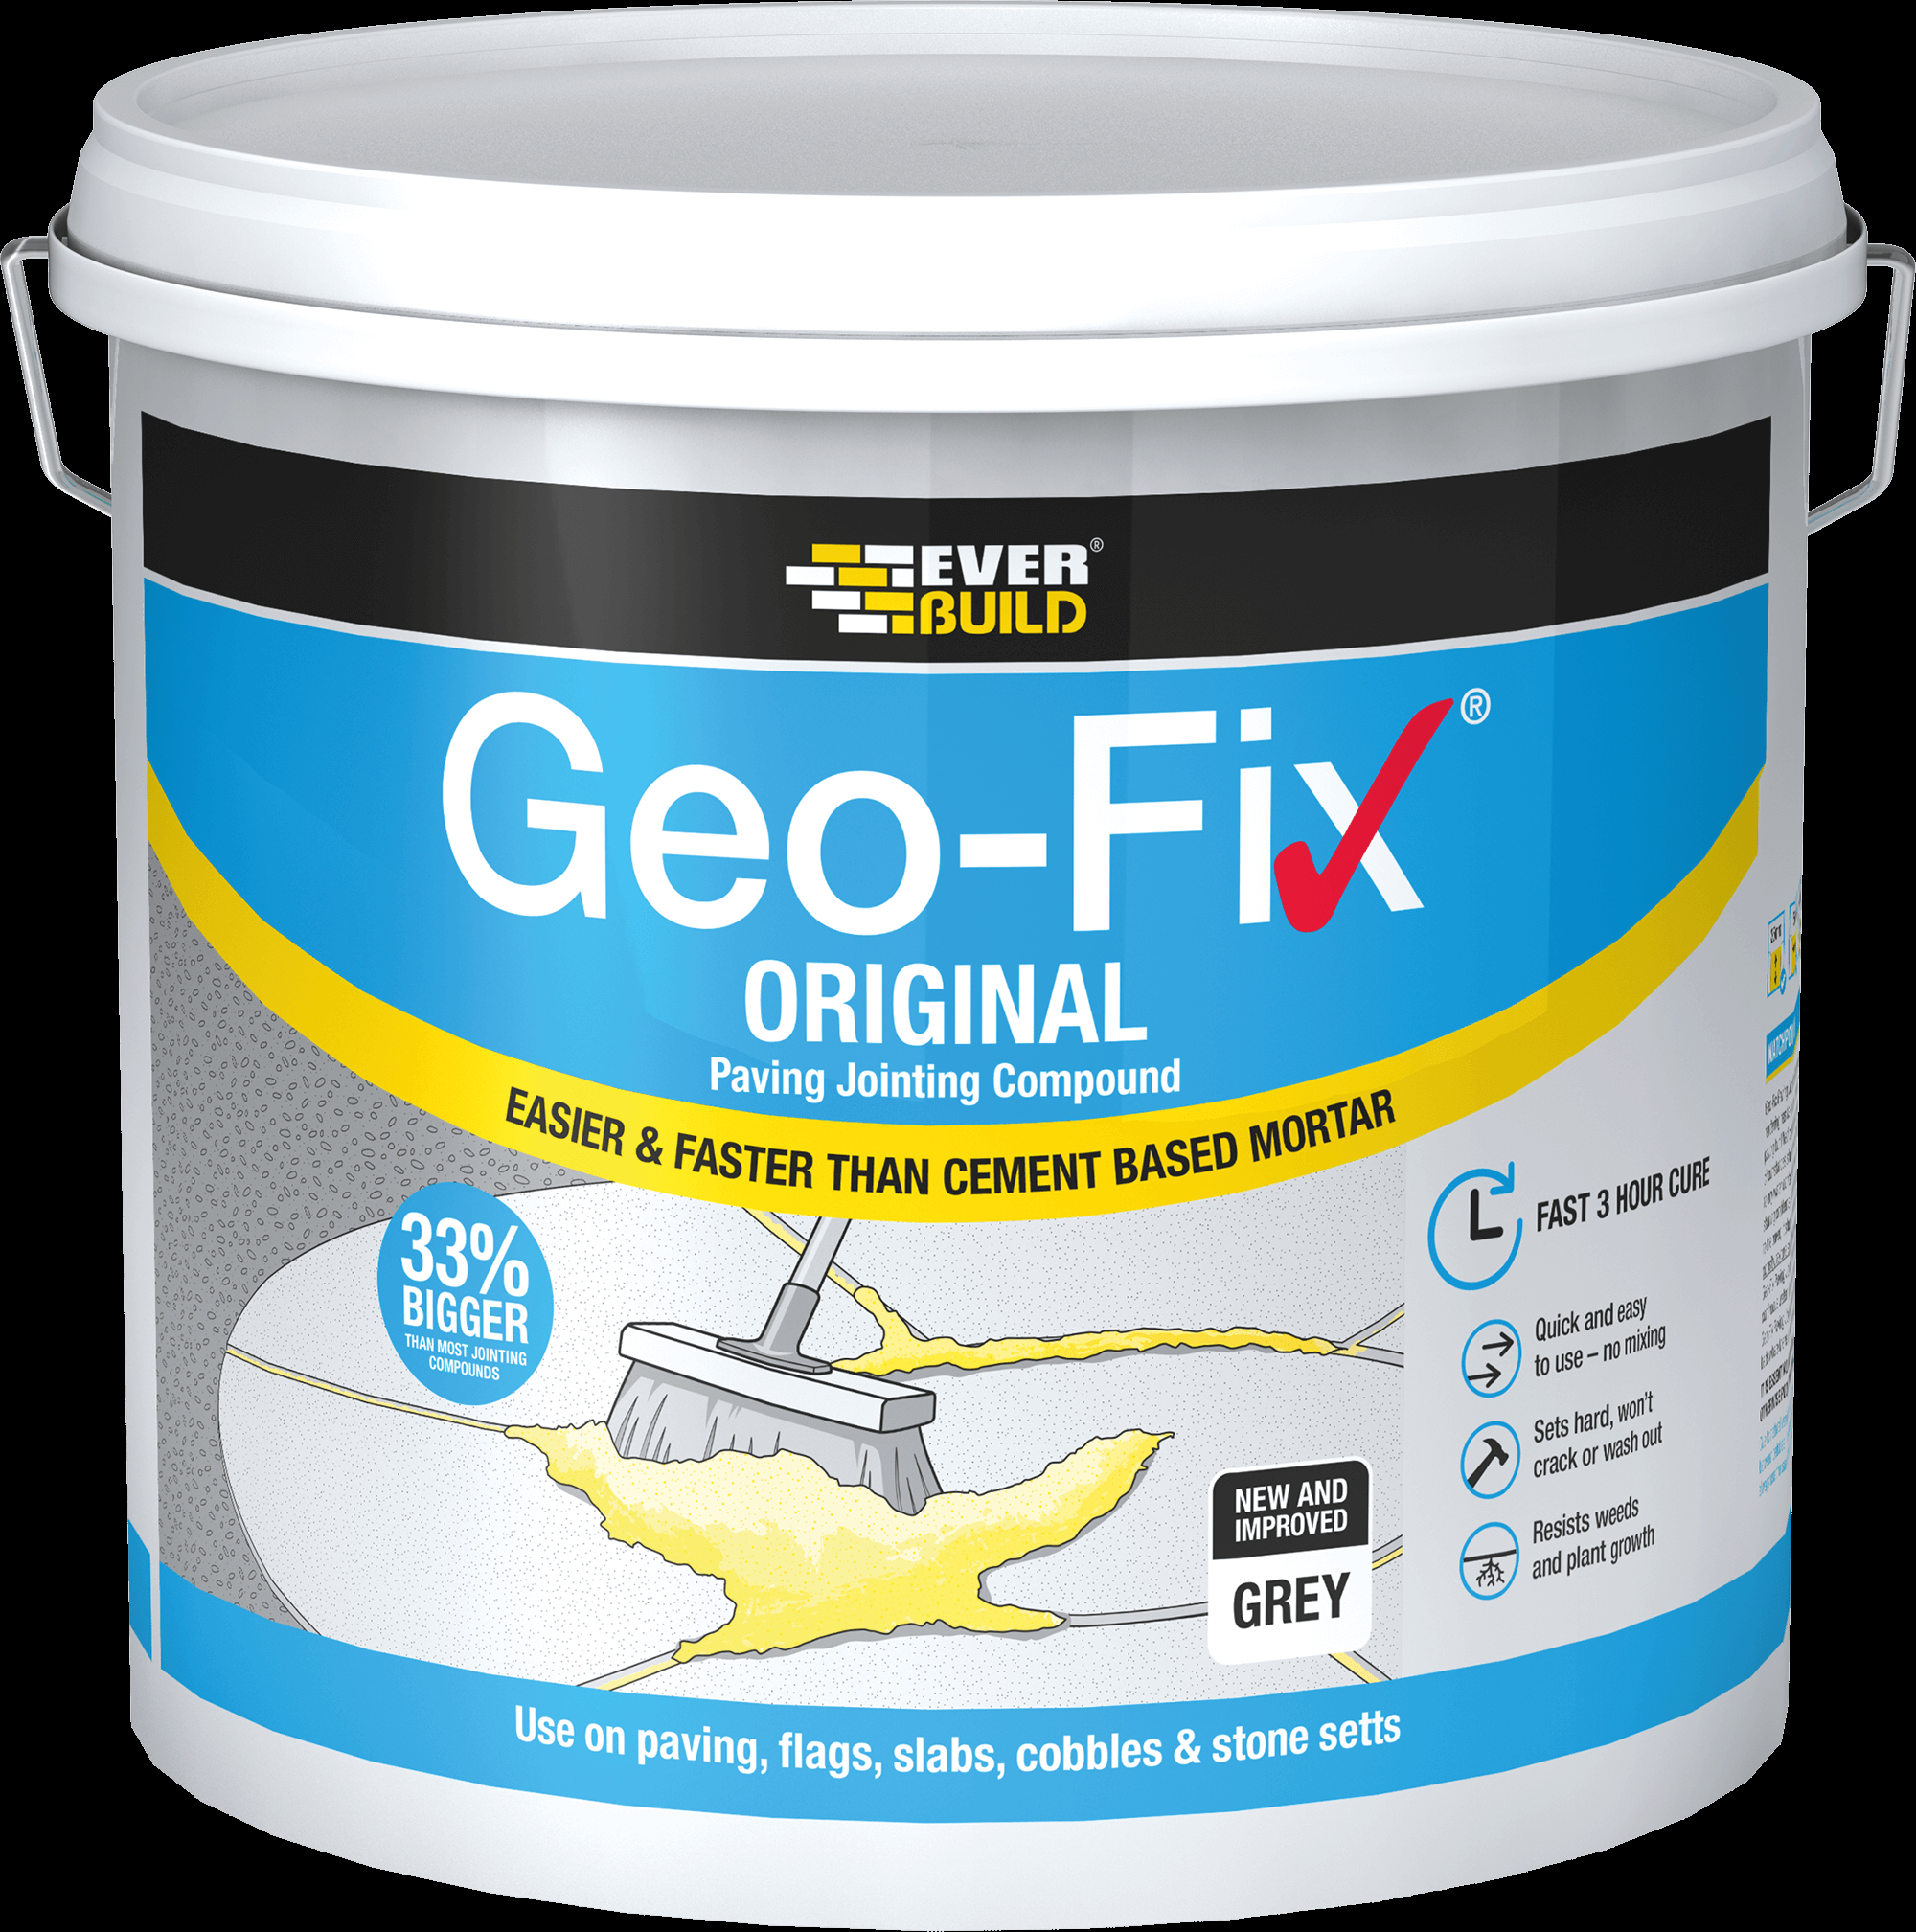 Geo Fix Original Paving Jointing Compound Everbuild for sizing 2000 X 2017